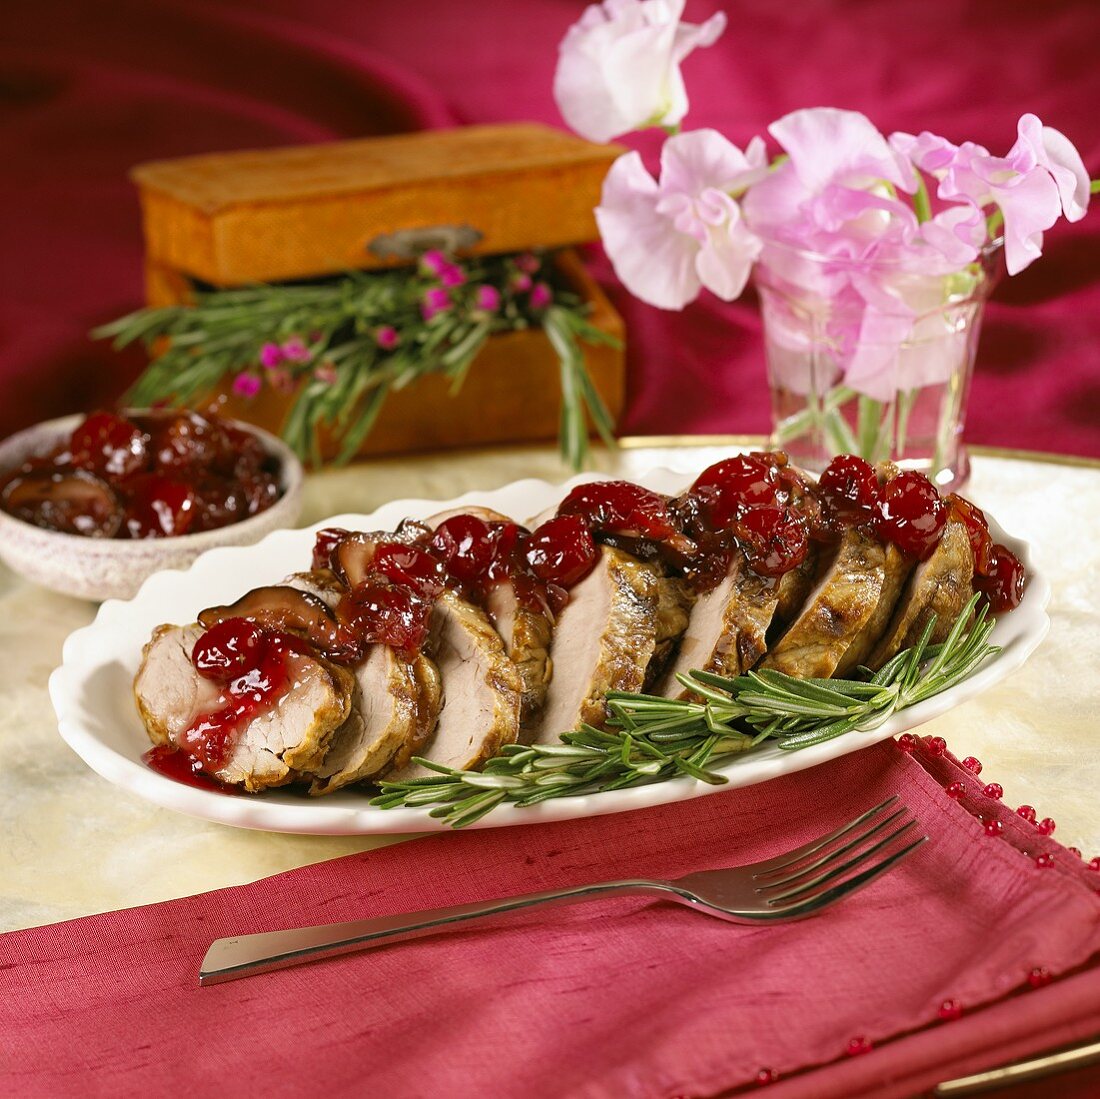 Mustard Marinated Sliced Pork Tenderloin with Cherry Compote on a Platter